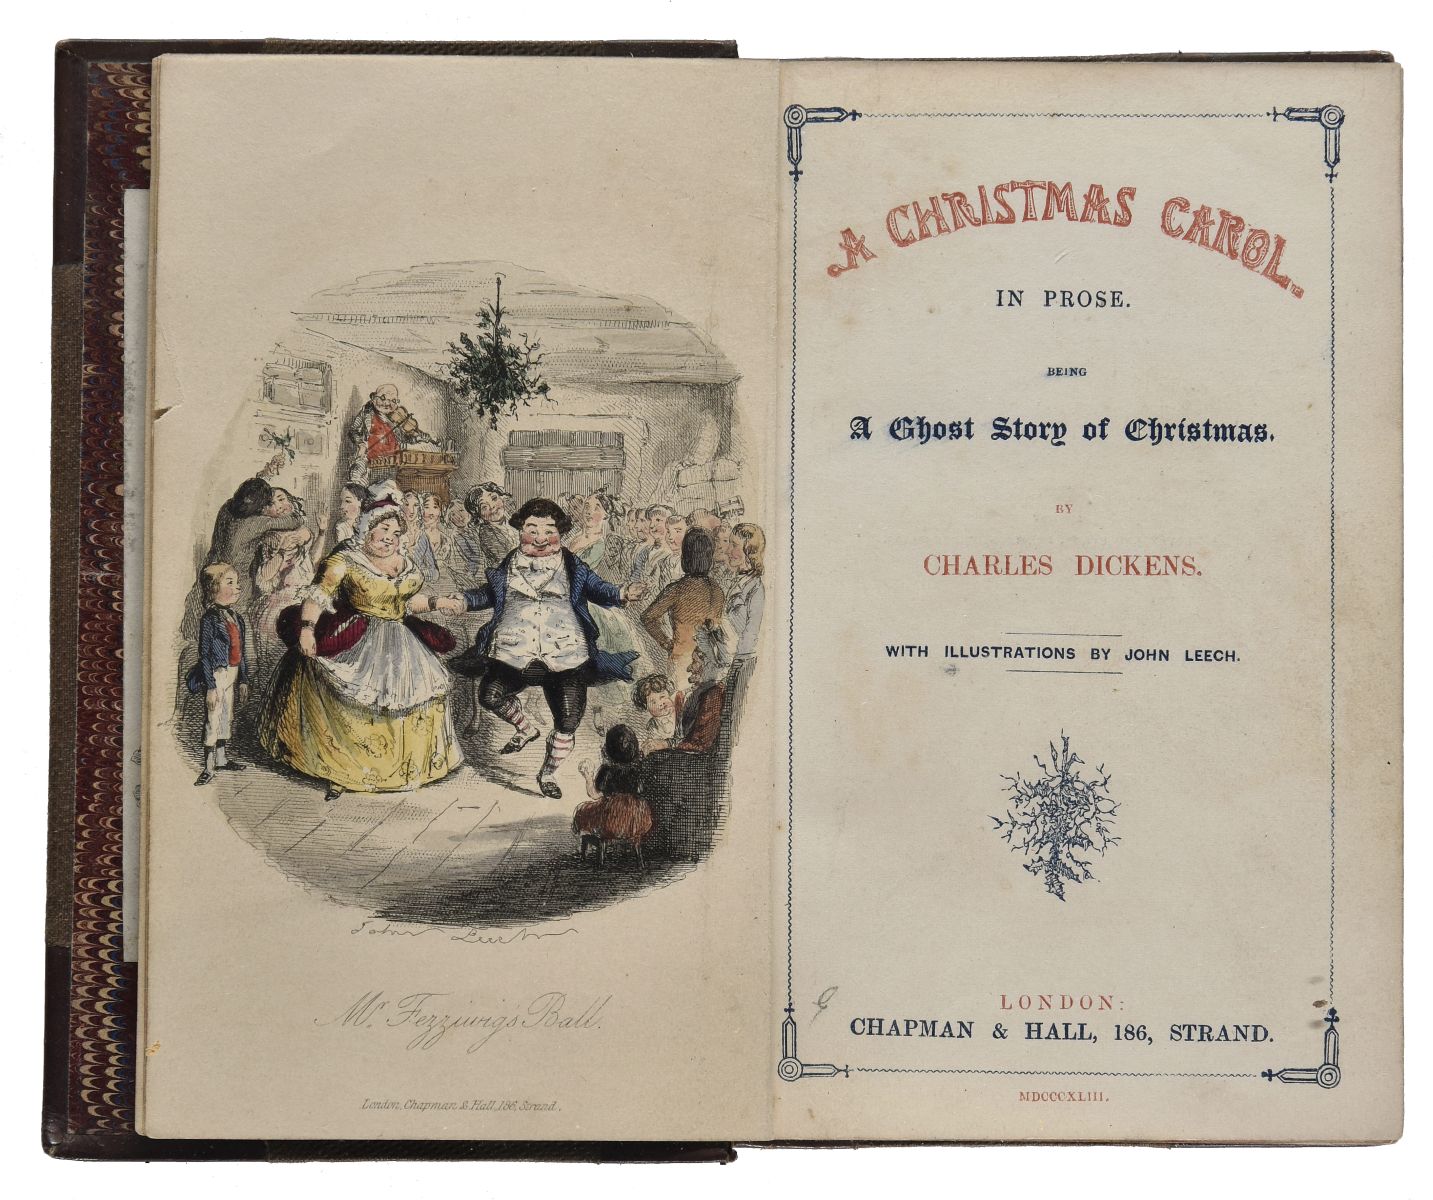 Dickens (Charles). A Christmas Carol. In Prose. Being a Ghost Story of Christmas